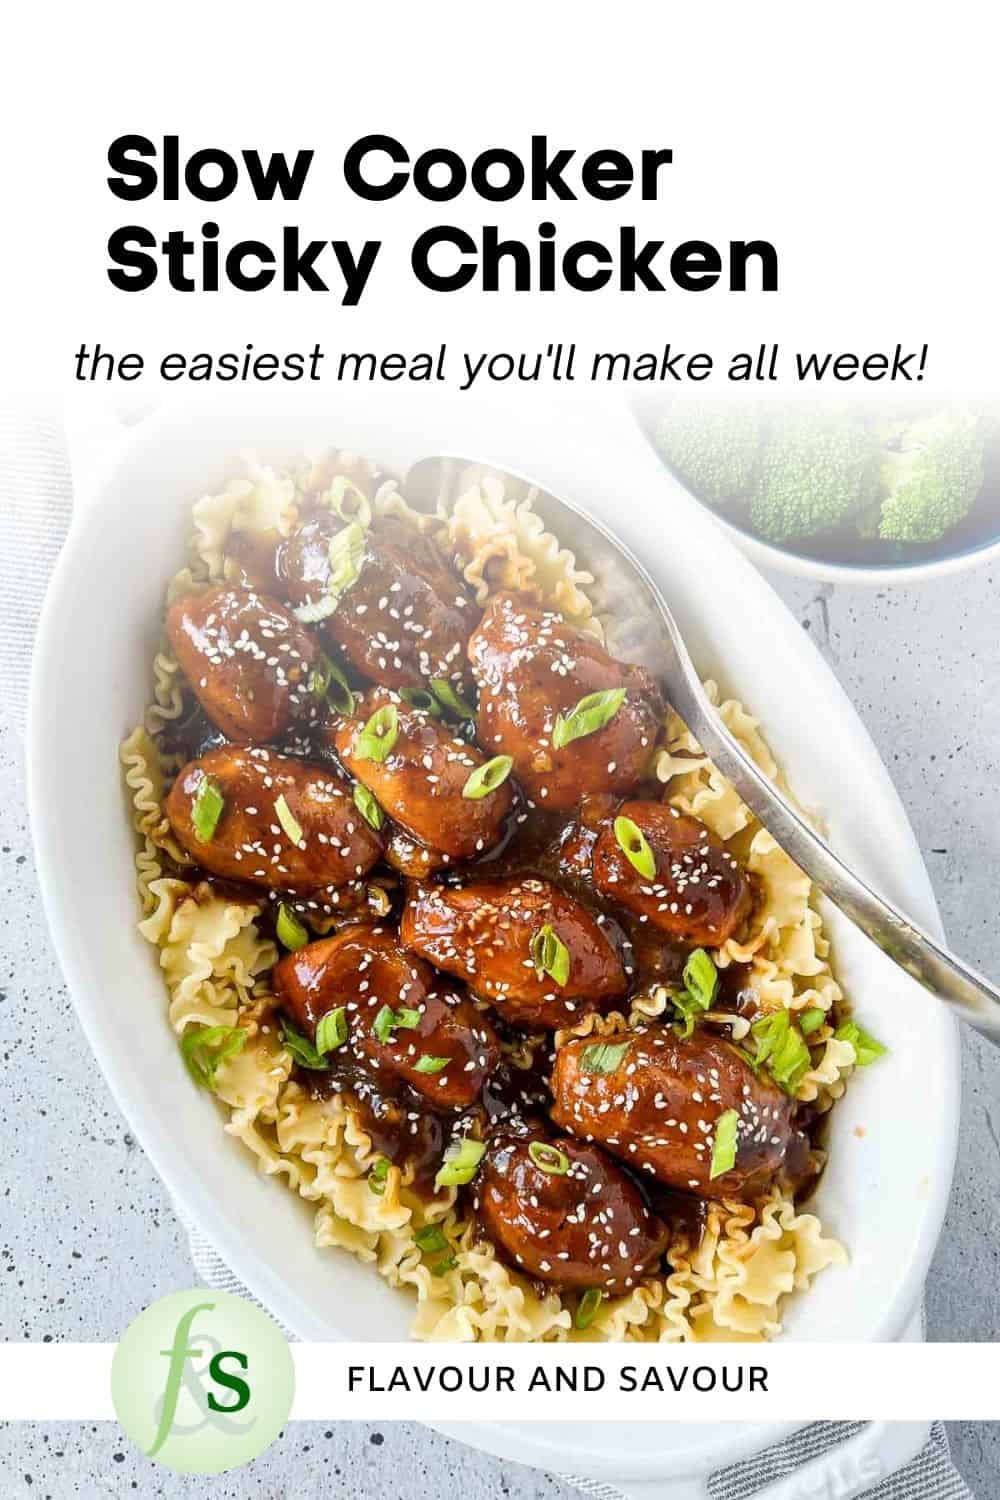 Image with text overlay Slow Cooker Sticky Chicken